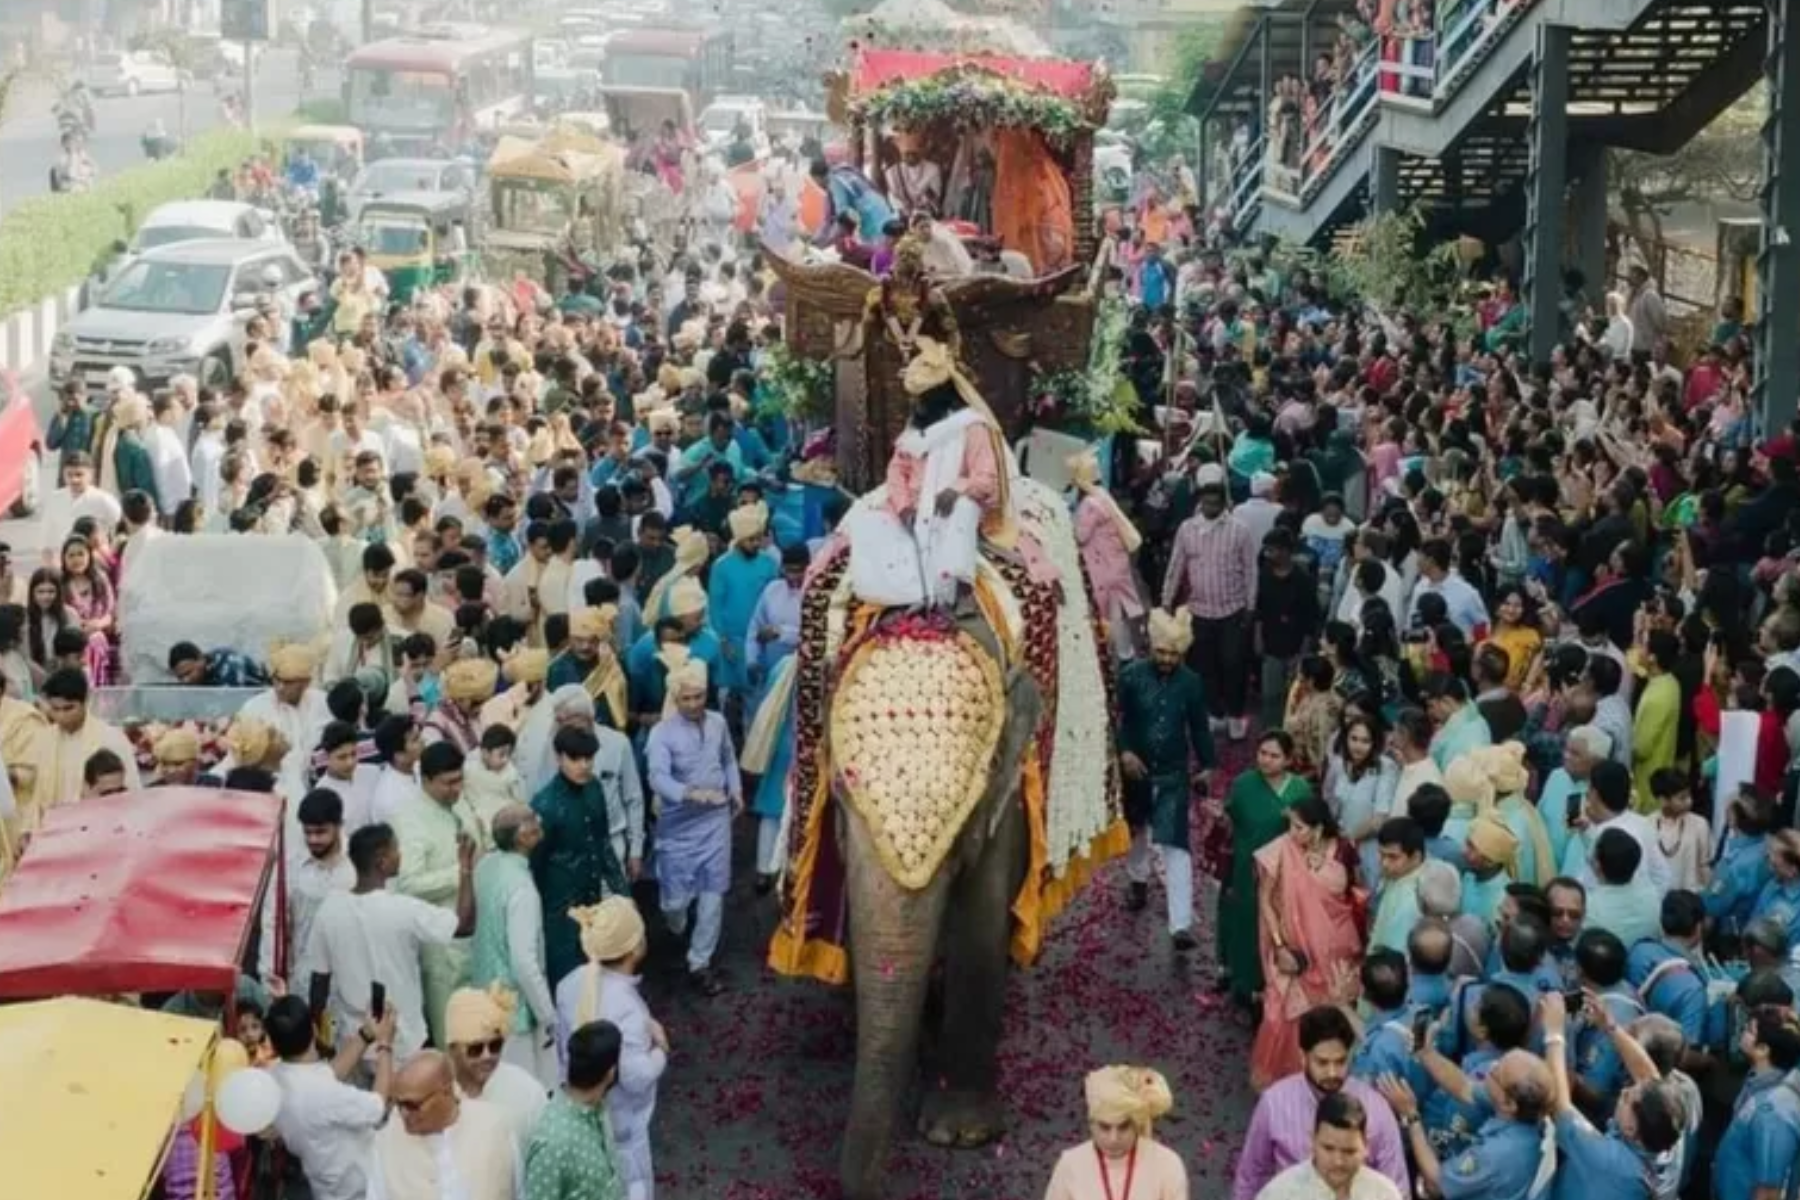 Devanshi and her family sat in a chariot pulled by an elephant, while crowds showered them with rose petals